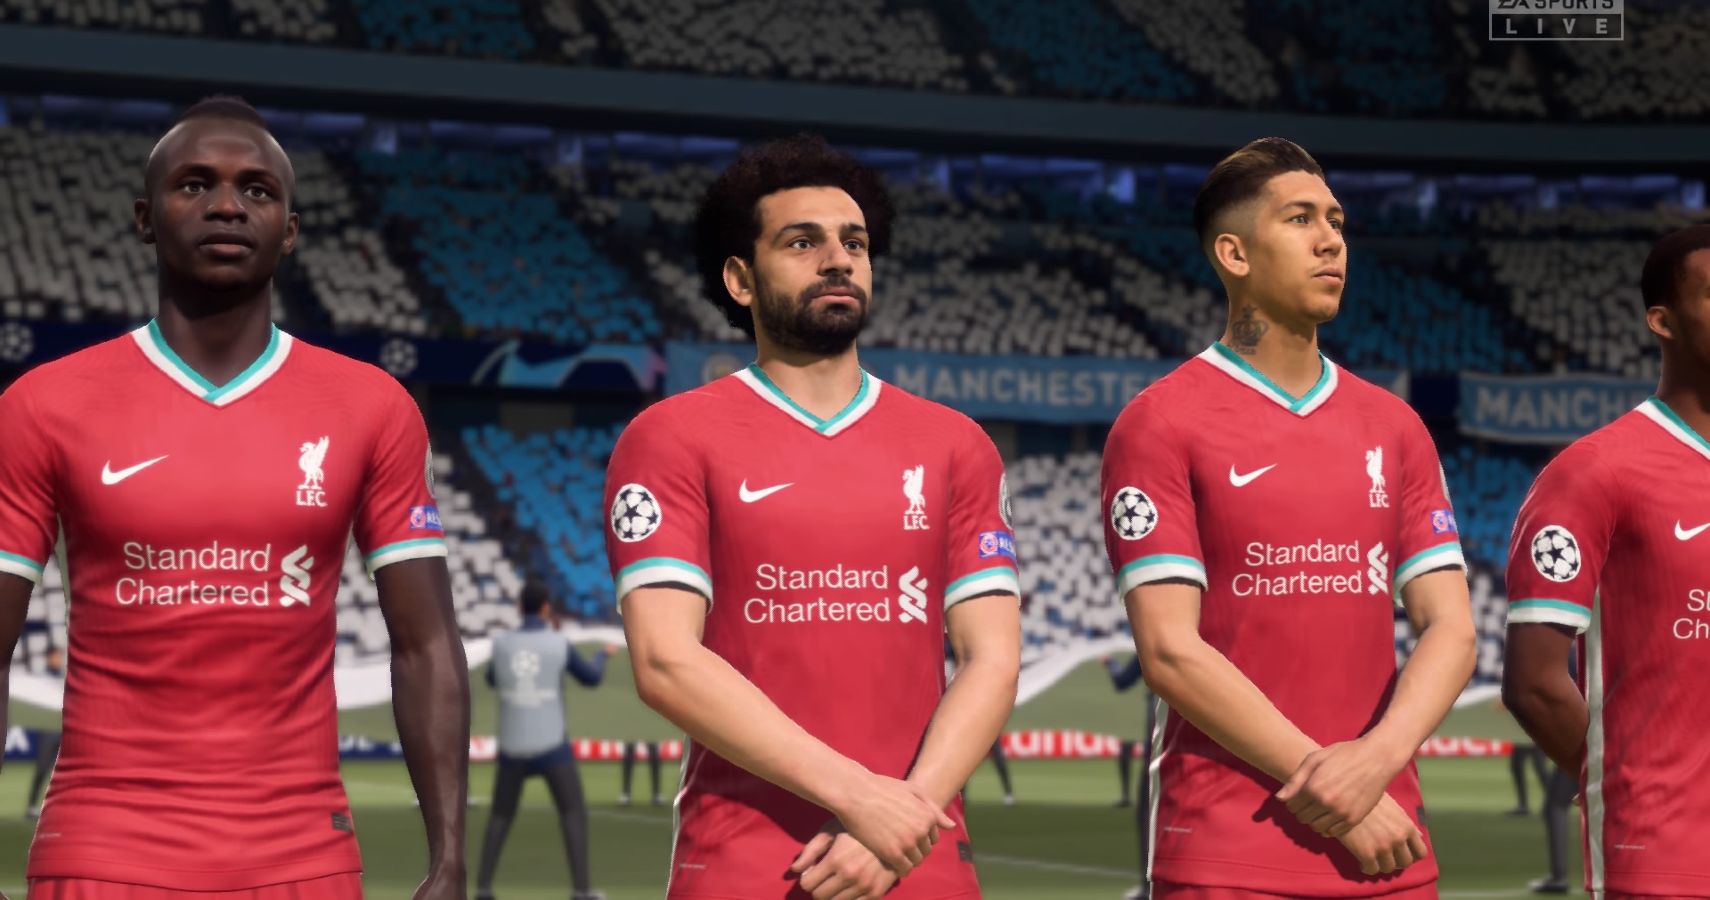 FIFA 22 Could Be Getting An Online Career Mode, According